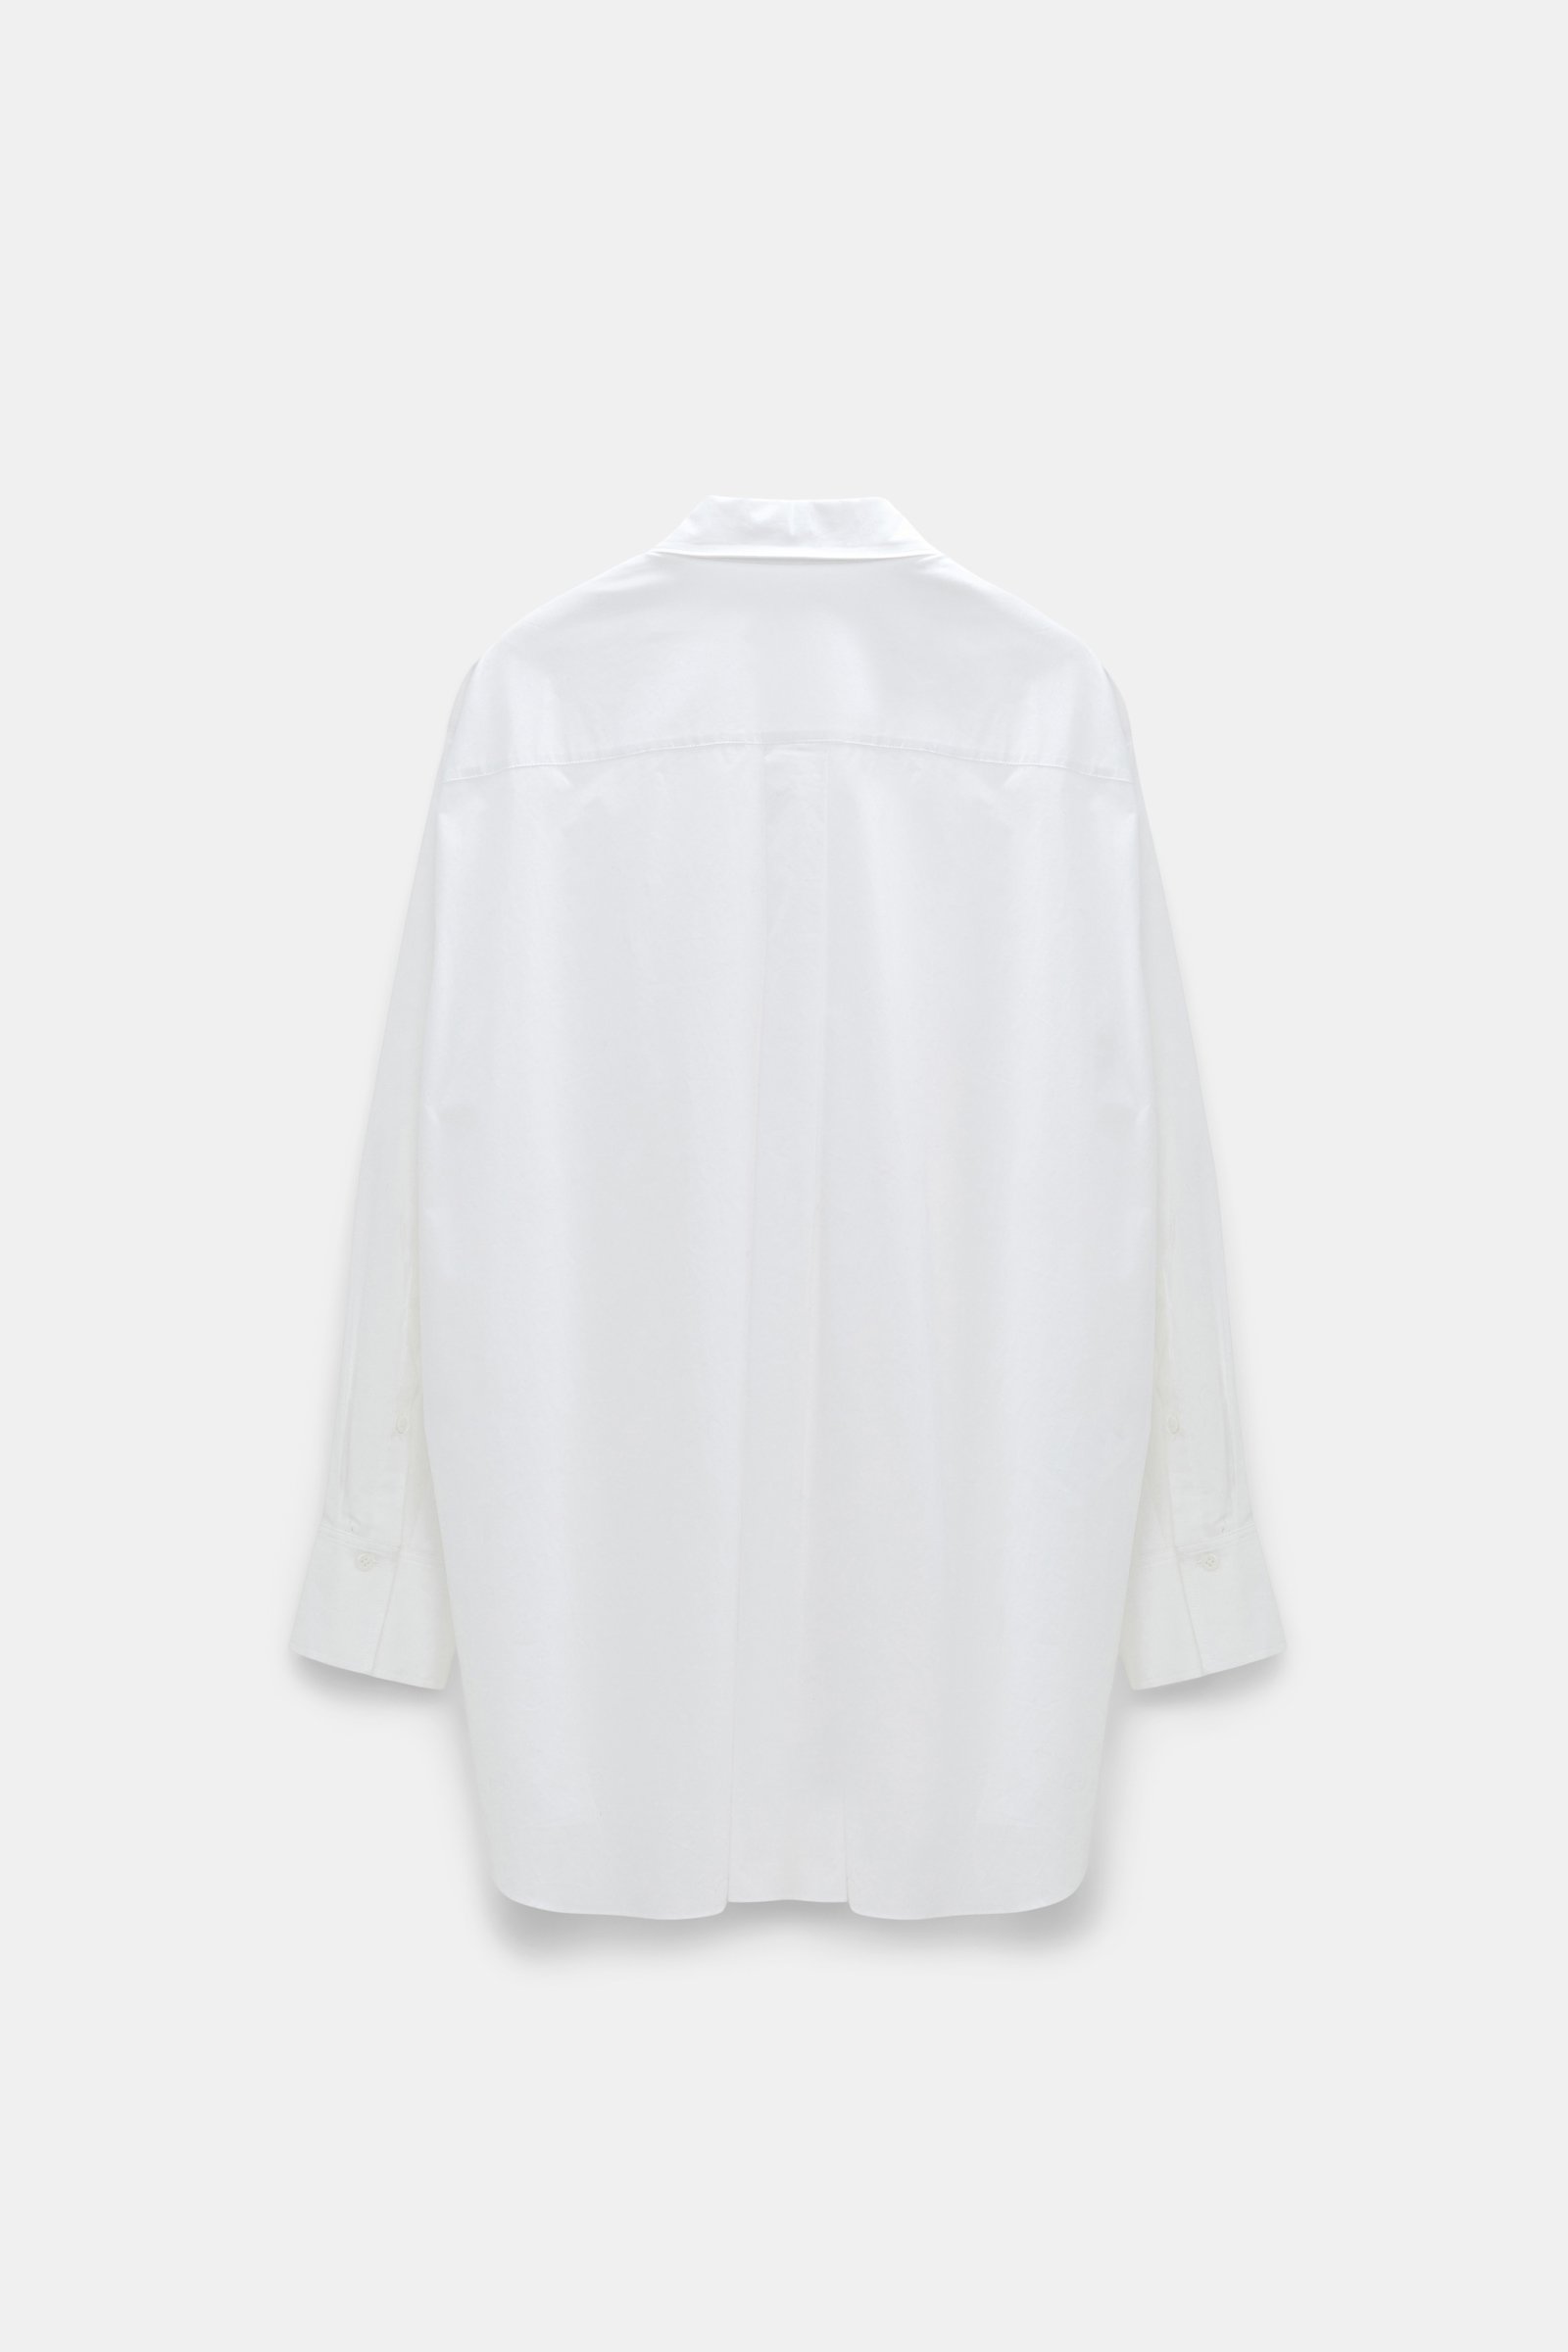 Dorothee Schumacher RELAXED POPLIN BLOUSE pure white